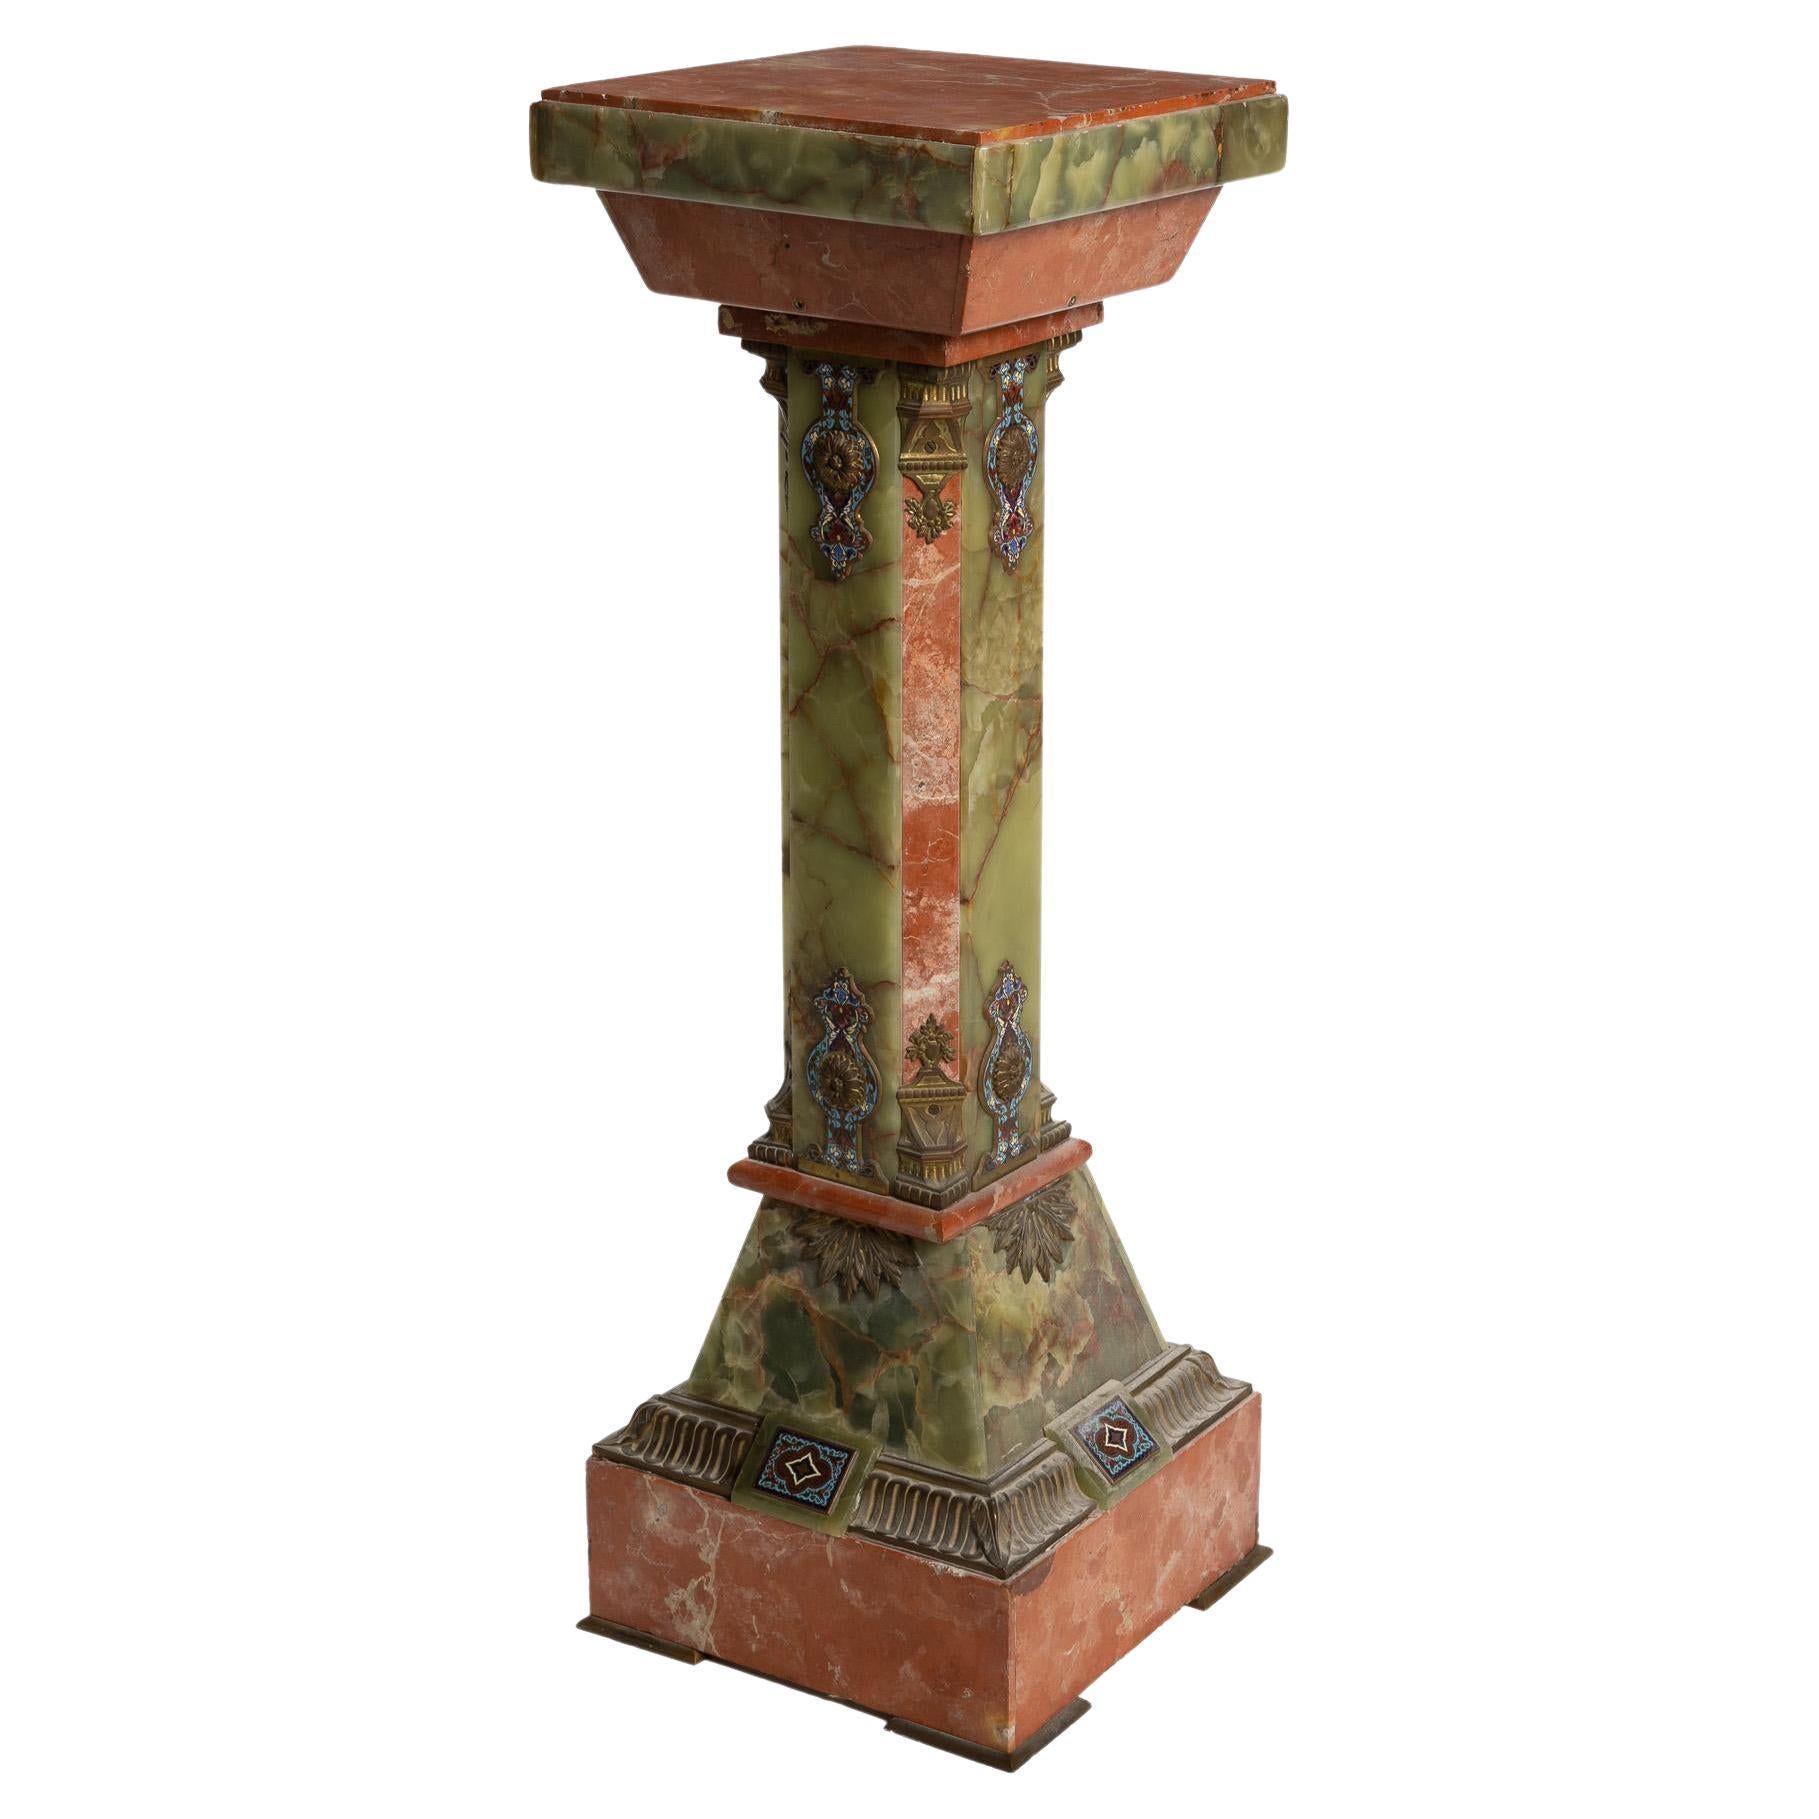 A French onyx and champlevé enamel pedestal